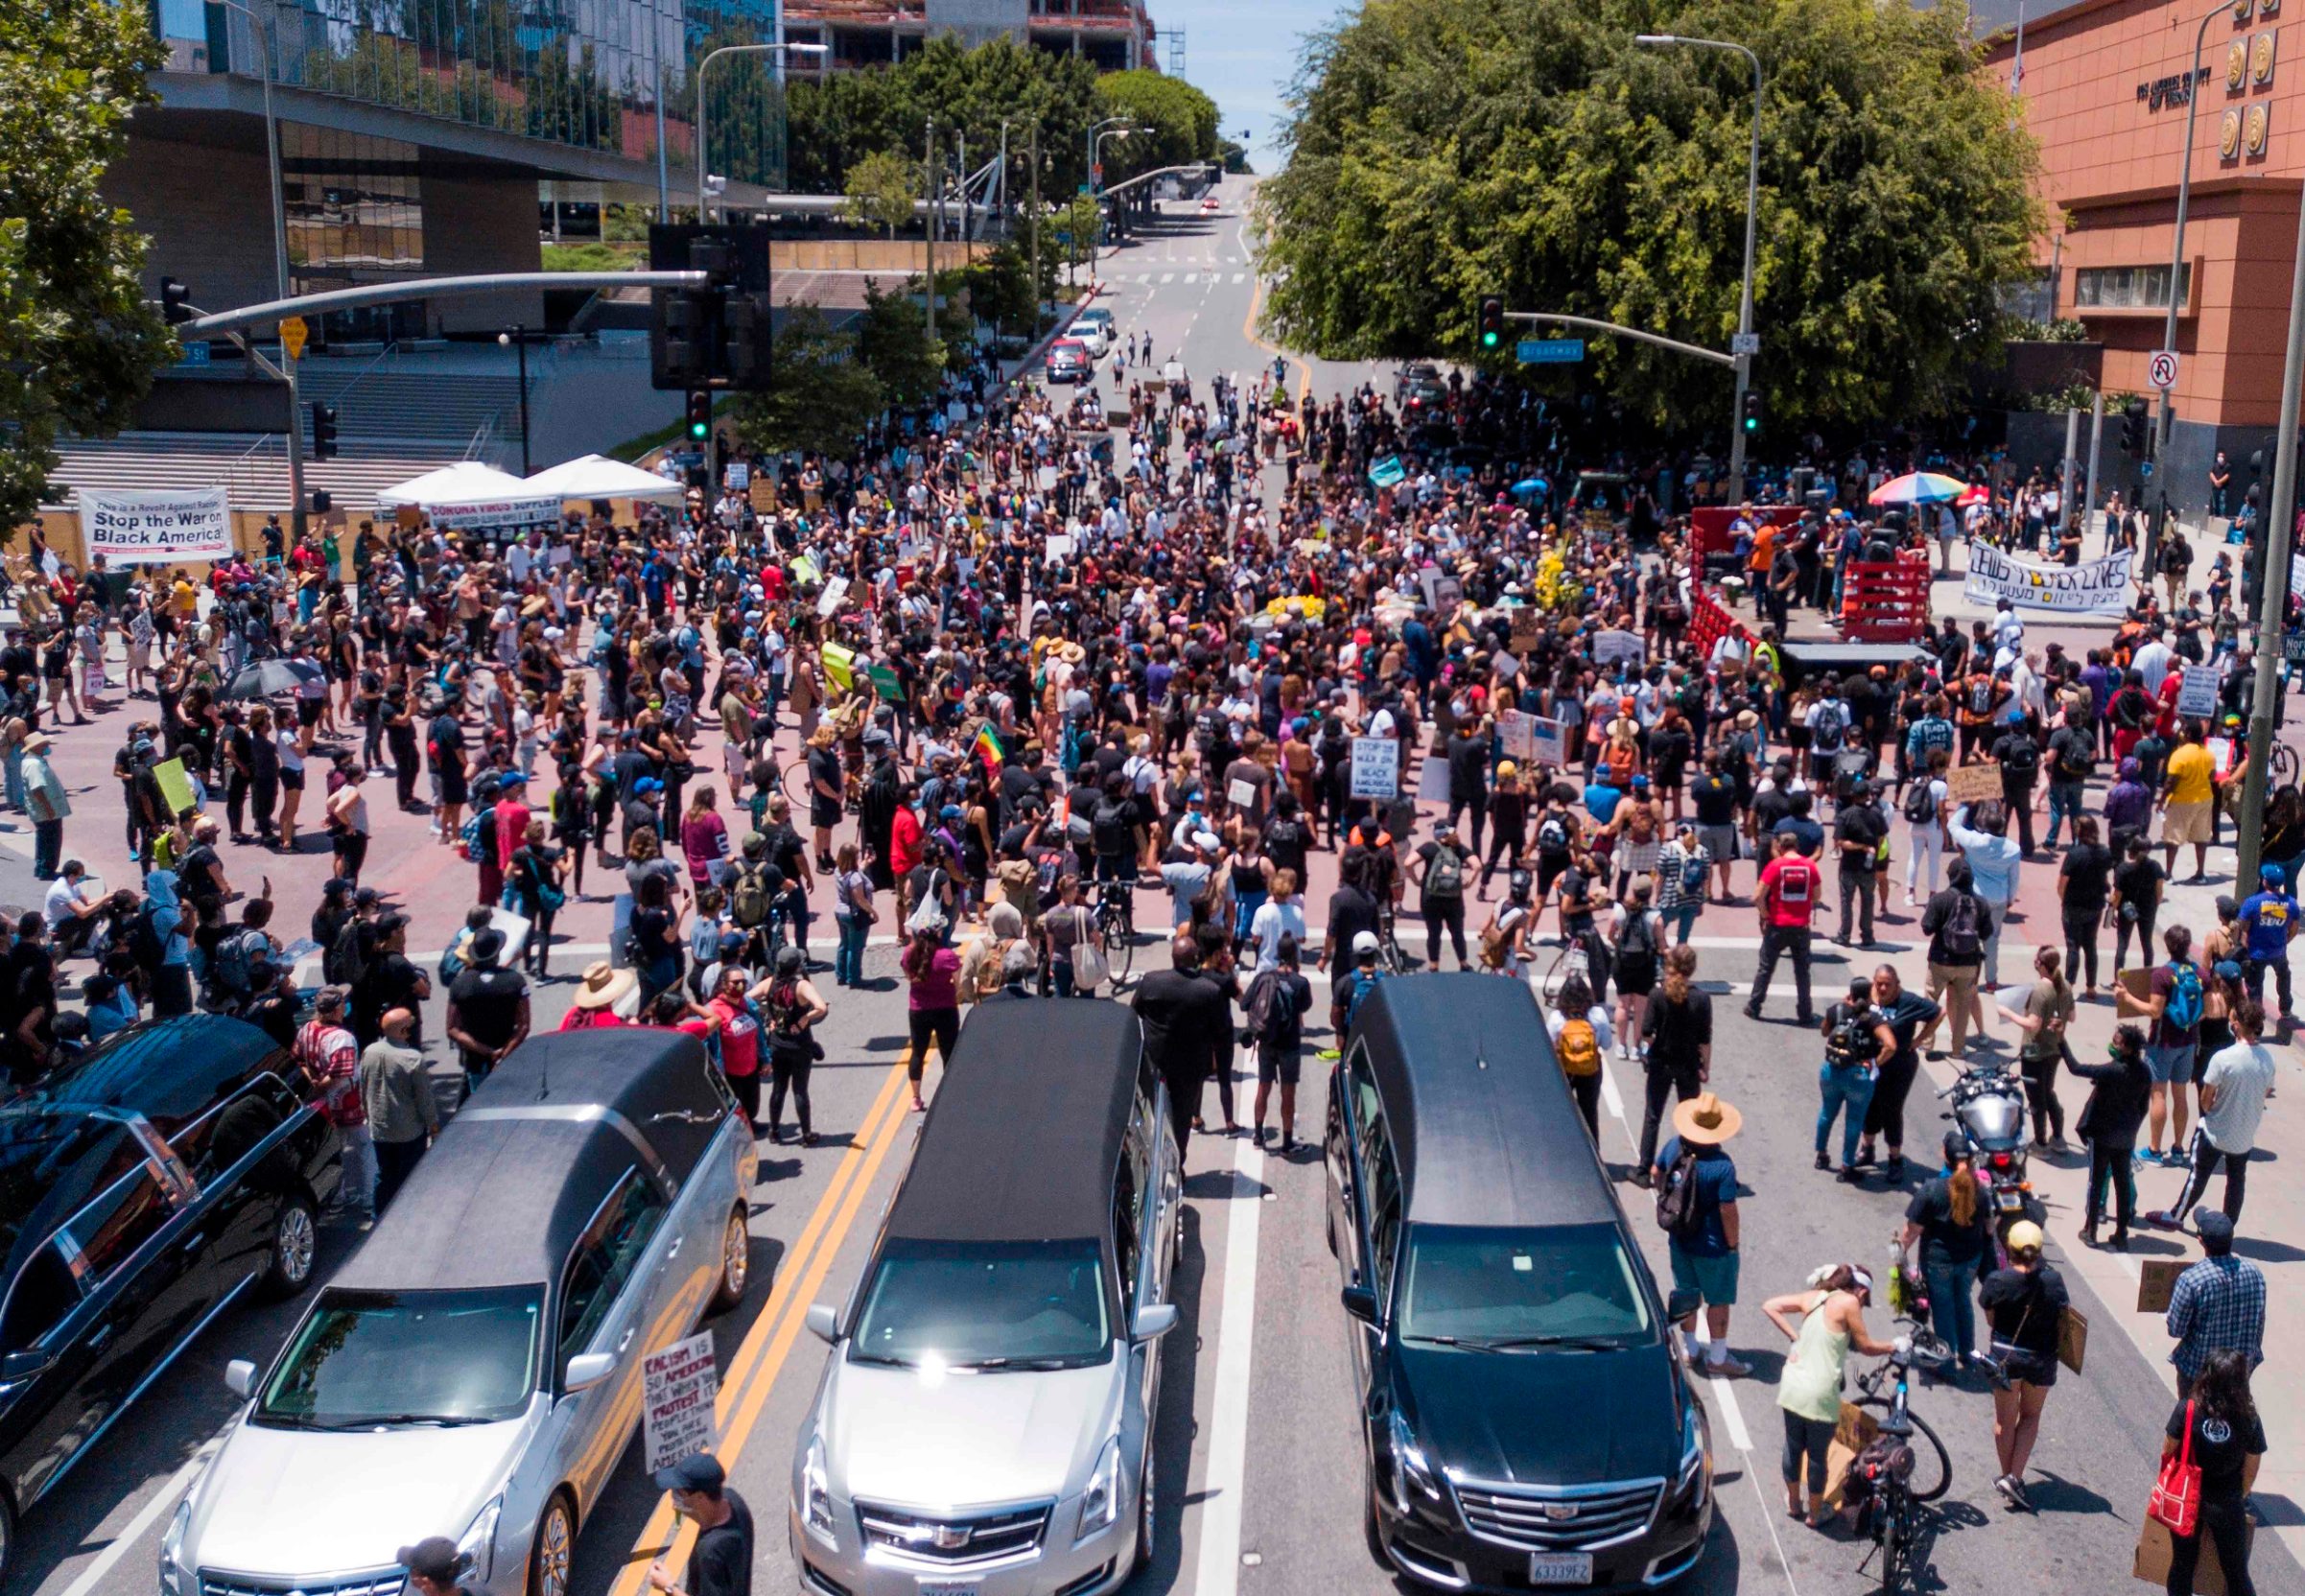 TOPSHOT - Black Lives Matter (BLM) supporters gather for a memorial service honoring George Floyd in downtown Los Angeles, California, on June 8, 2020. - Hearses from four different parts of greater Los Angeles meet downtown for the peaceful interfaith gathering as demonstrations continued across the nation to demand police reform and social justice. (Photo by Robyn Beck / AFP)